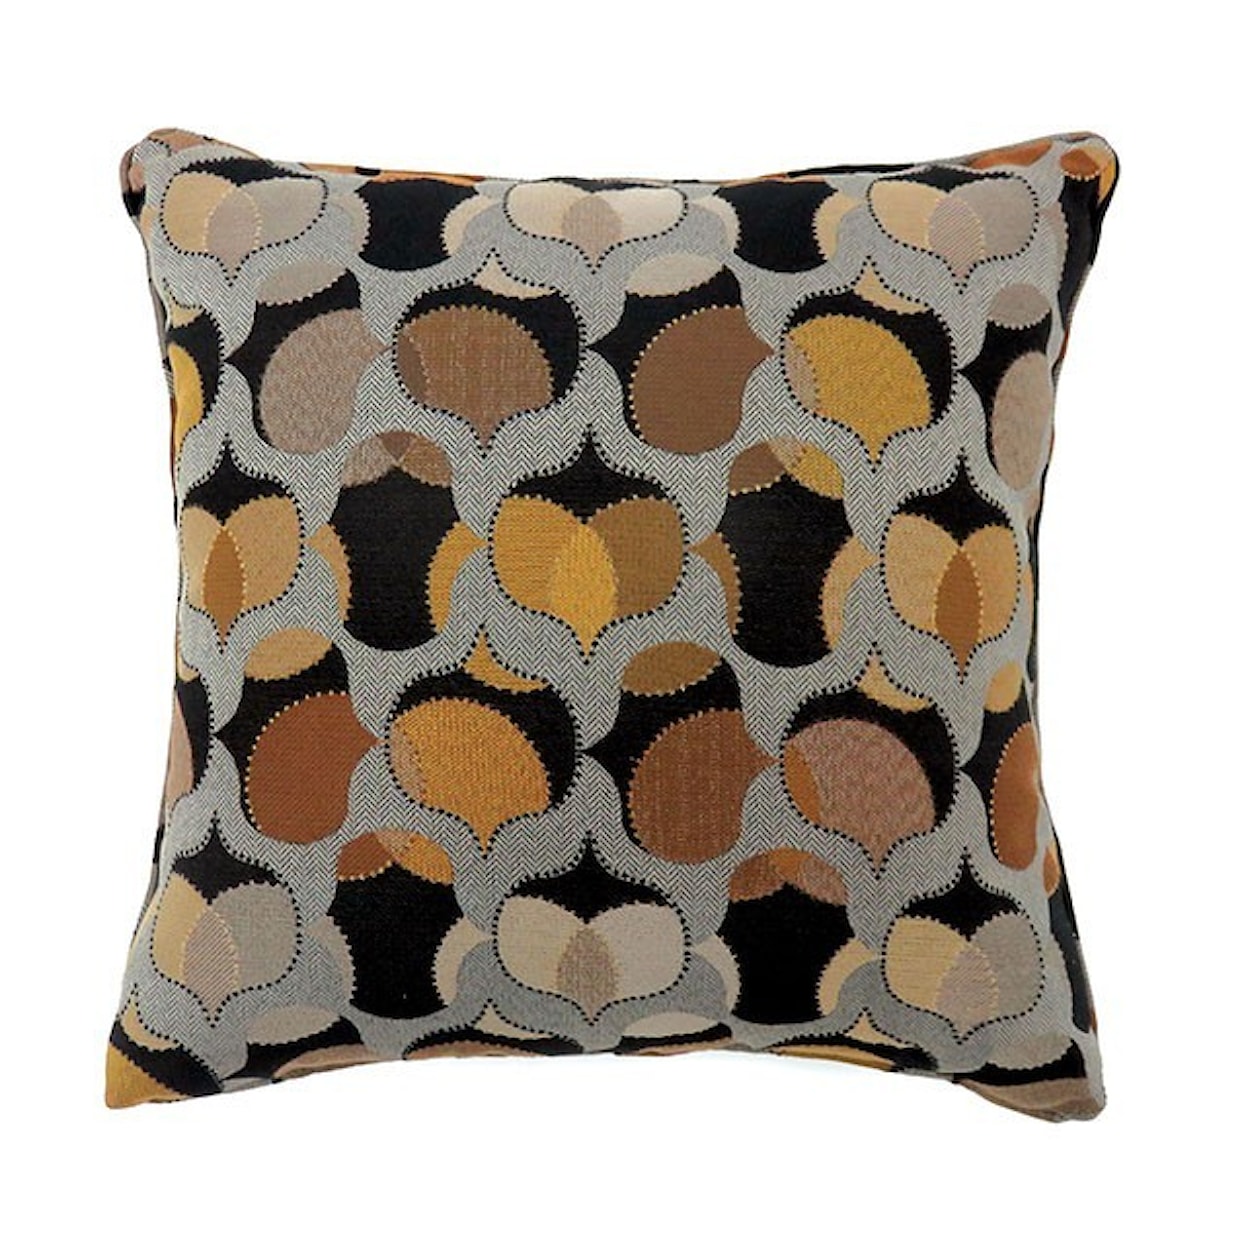 Furniture of America Onio Set of Two 18" X 18" Pillows, Multi